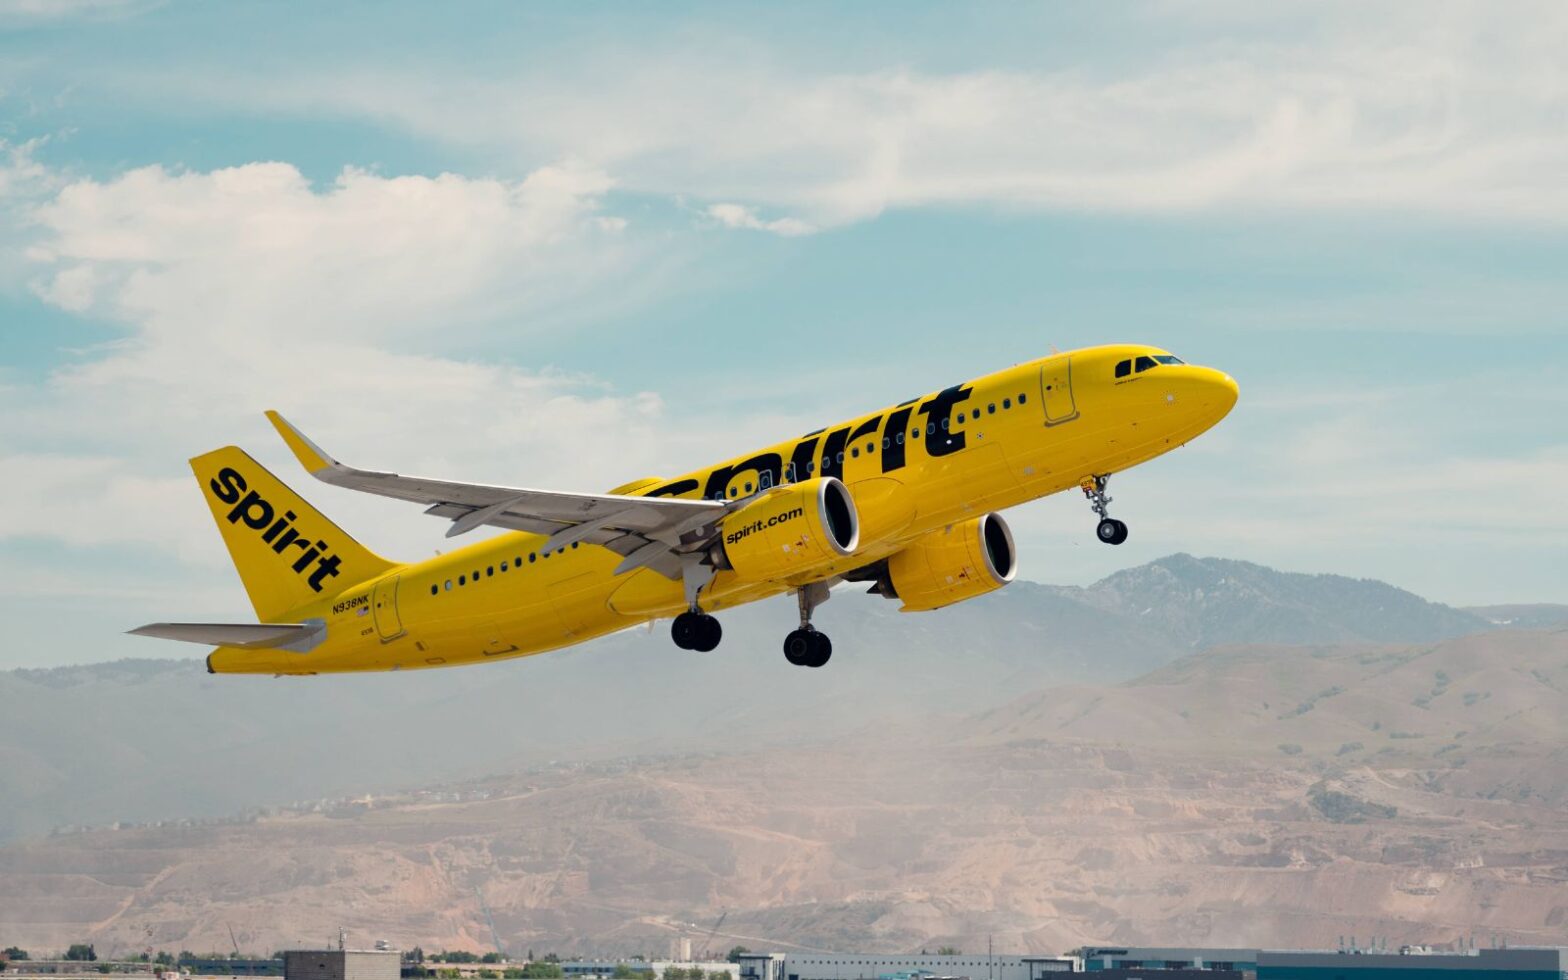 Spirit airlines plane taking off - company introduces new AI tech to improve flight schedules